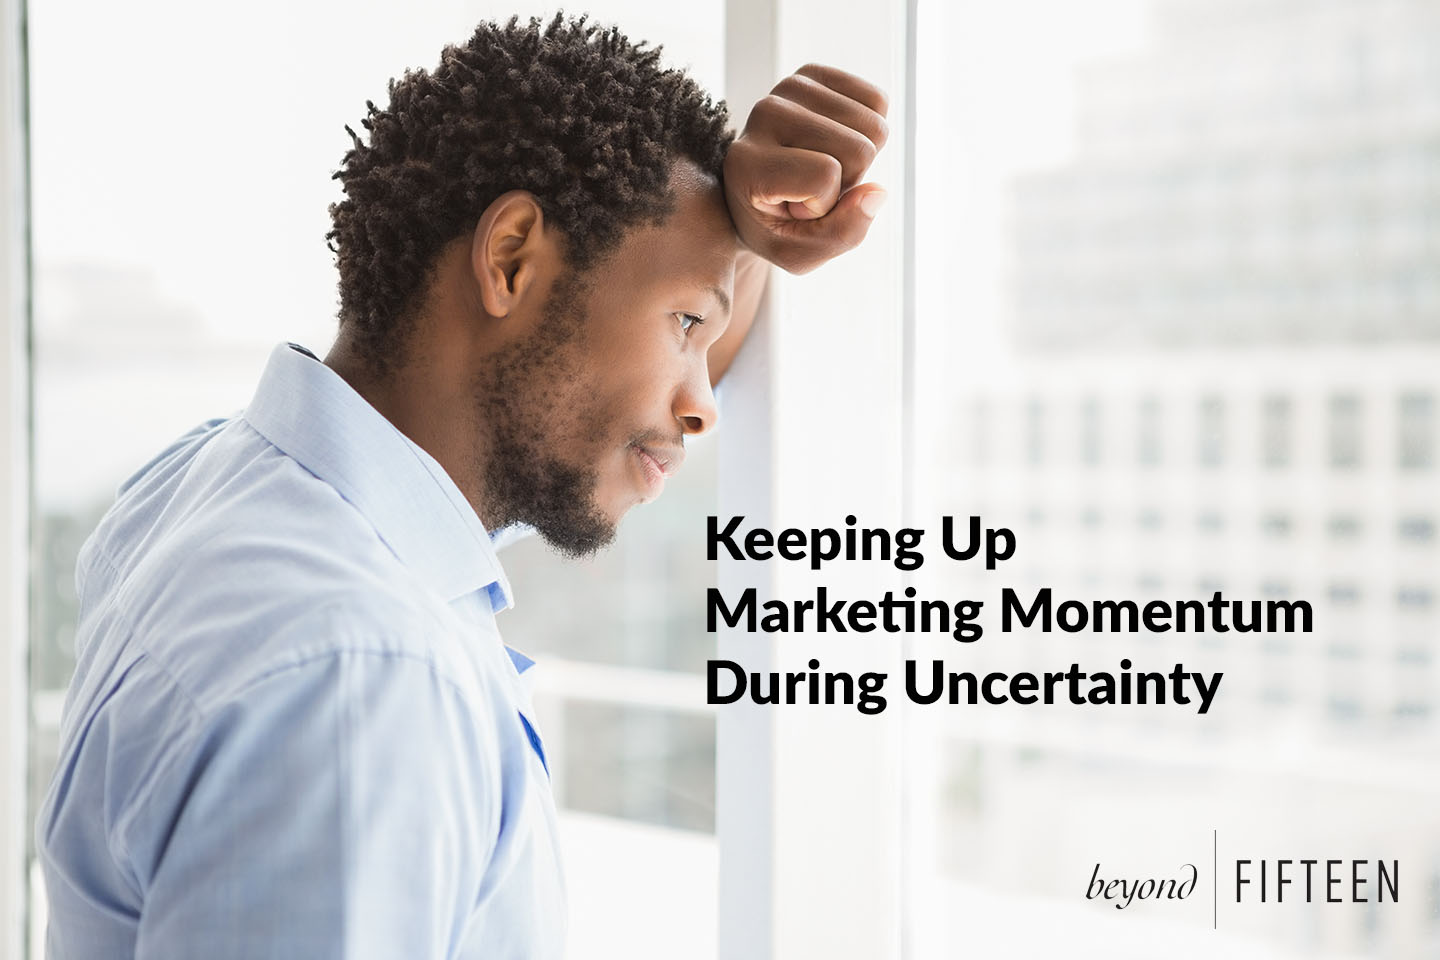 Keeping Up Marketing Momentum During Uncertainty